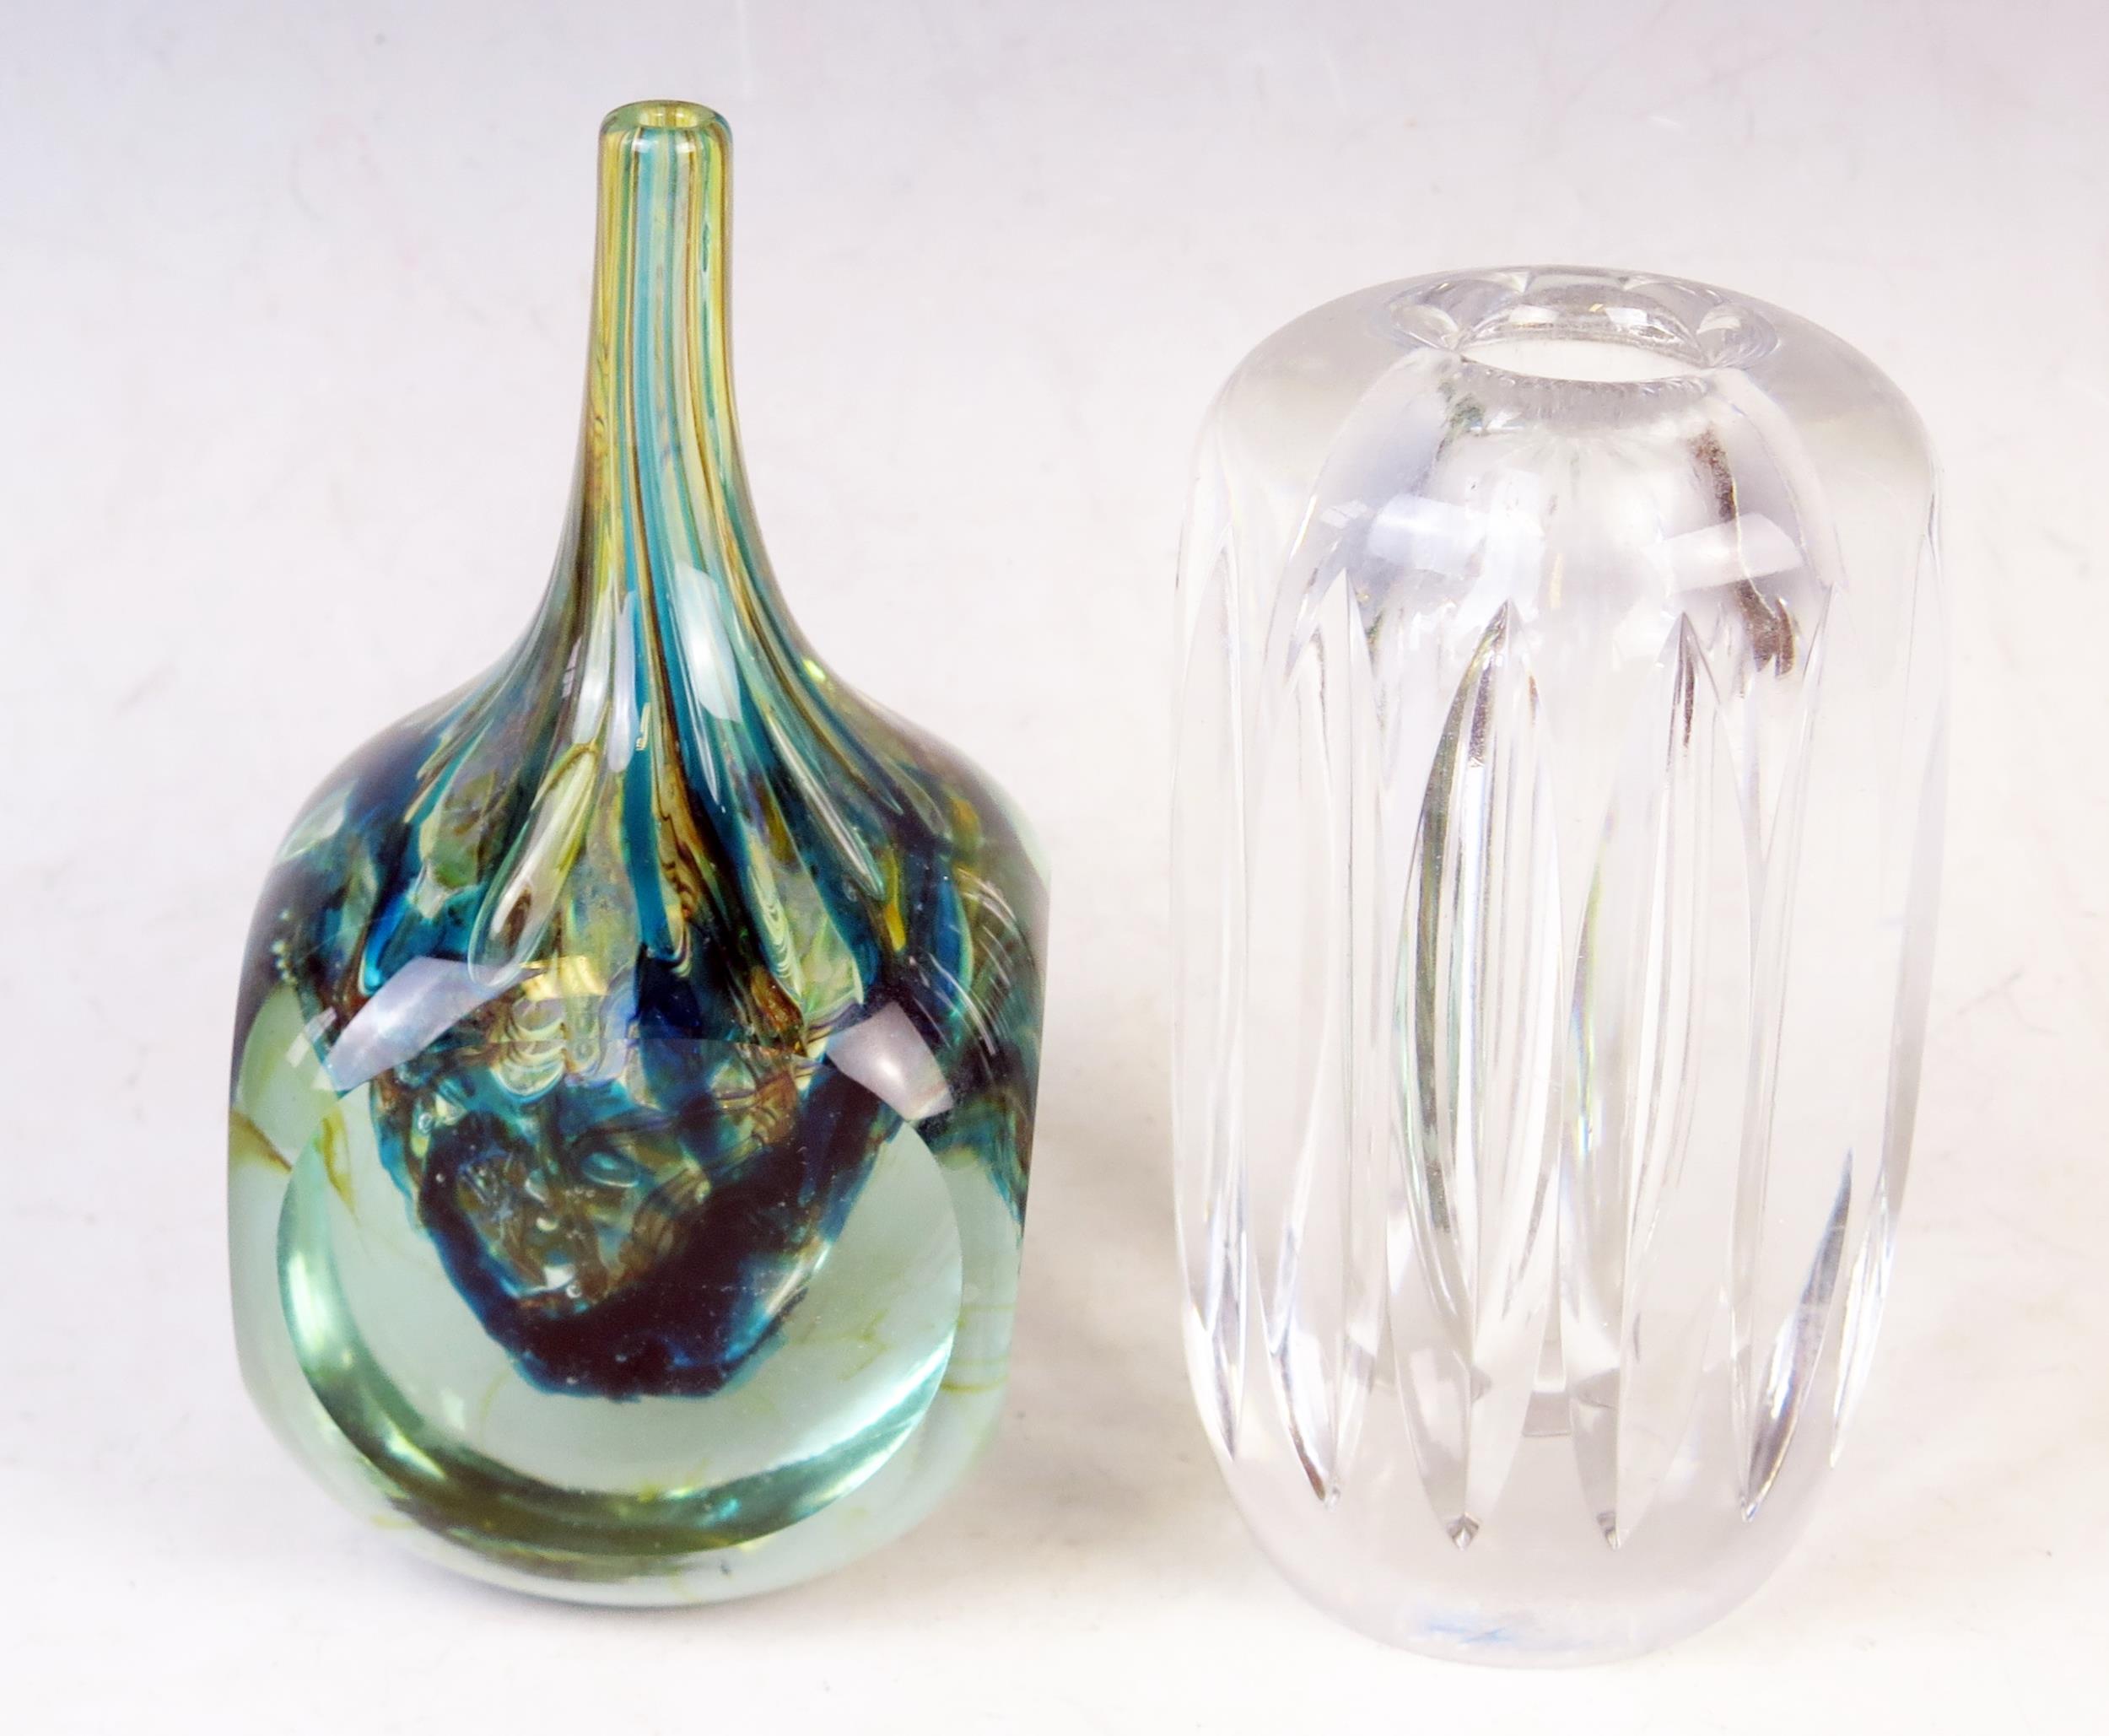 A Mdina variegated glass vase of square outline with slender neck, 18cm high, together with a